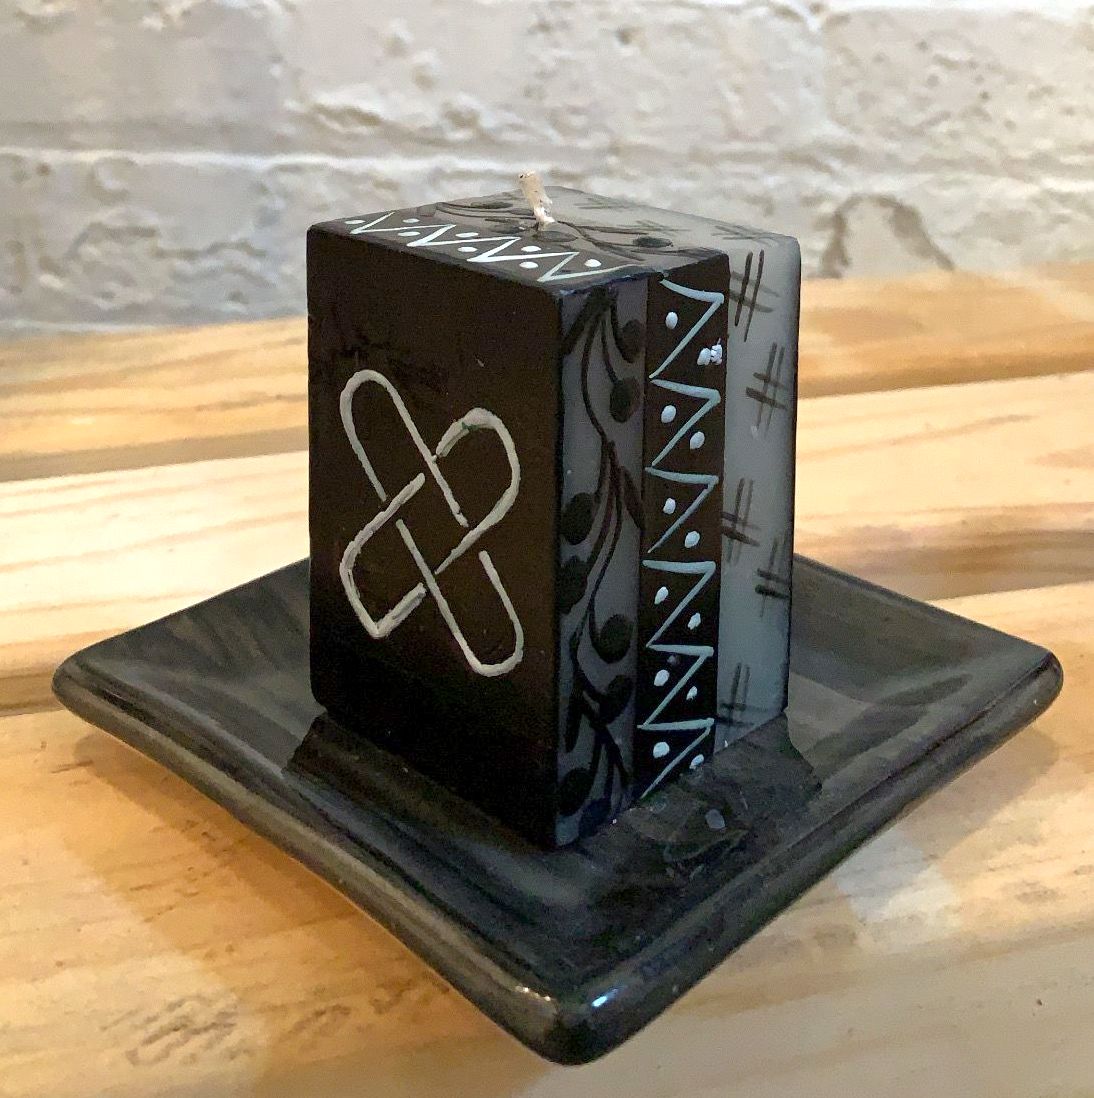 Kwanzaa black 2x2x3 cube candle showing the symbol on the front and the flower design on the side.  Sitting on a black candle coaster.  Fair Trade.